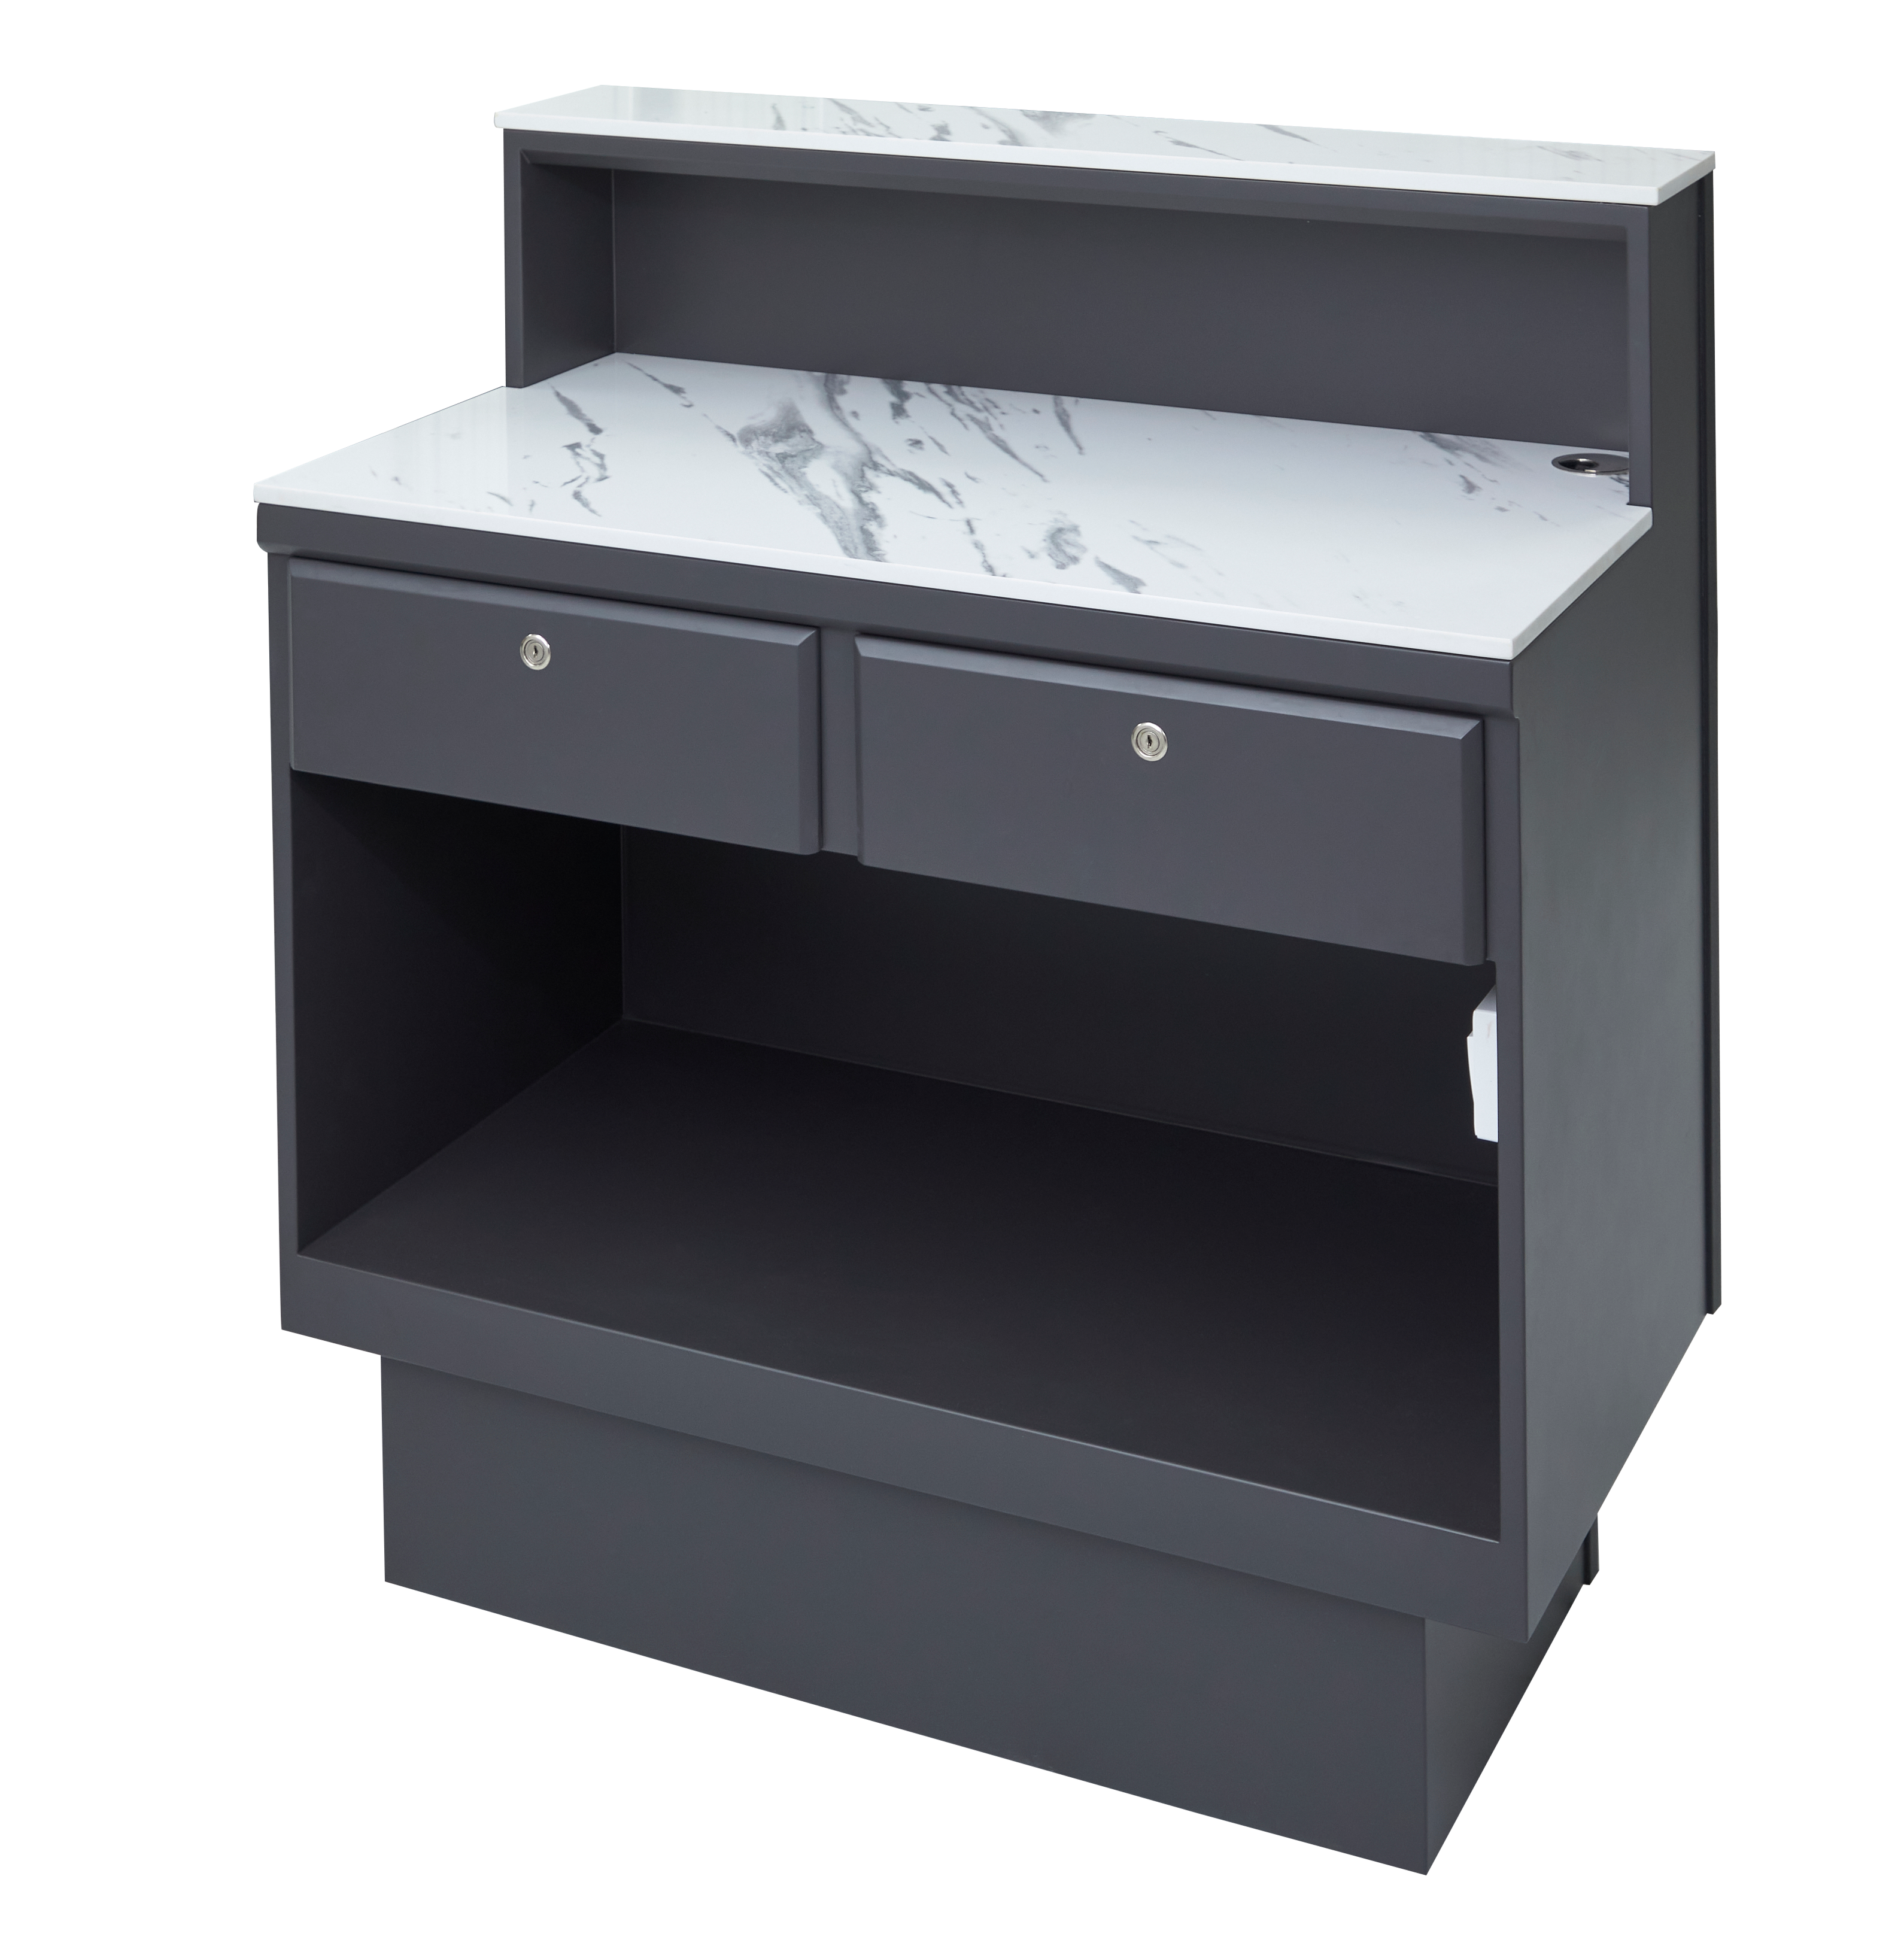 The Westwood Desk - Black Finish with White Pattern Natural Stone Top by SEC